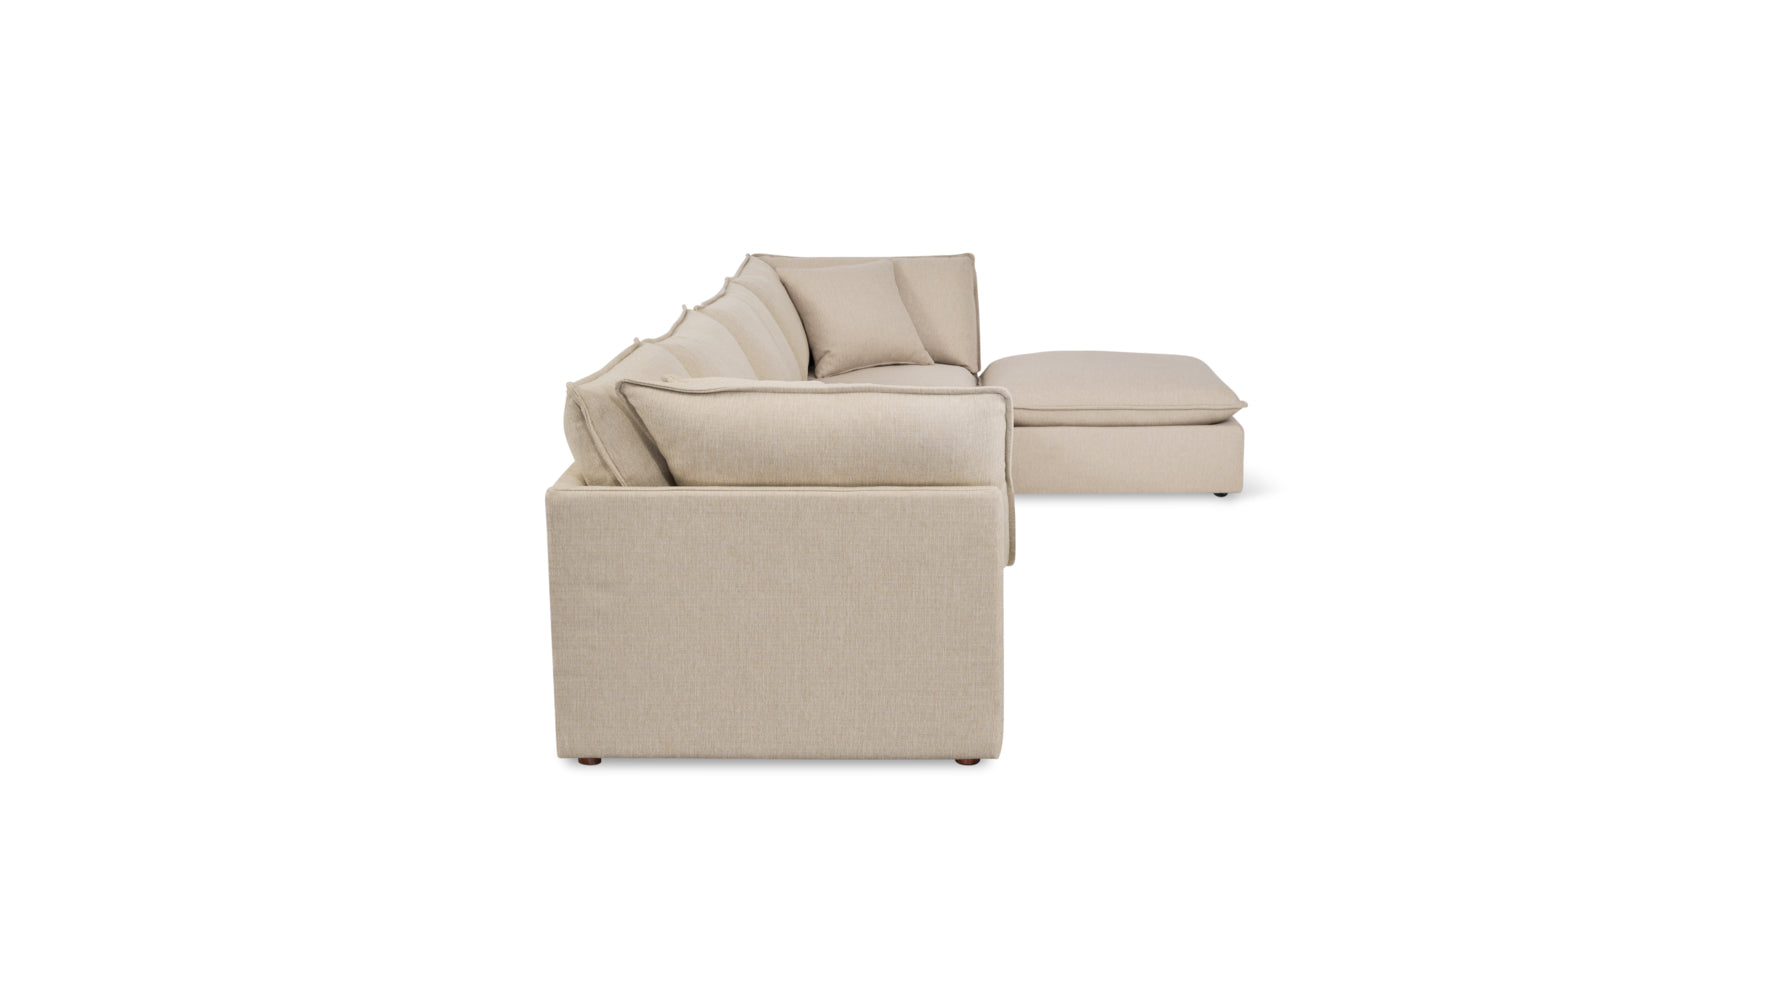 Chill Time 4-Piece Modular Sectional, Biscuit - Image 3